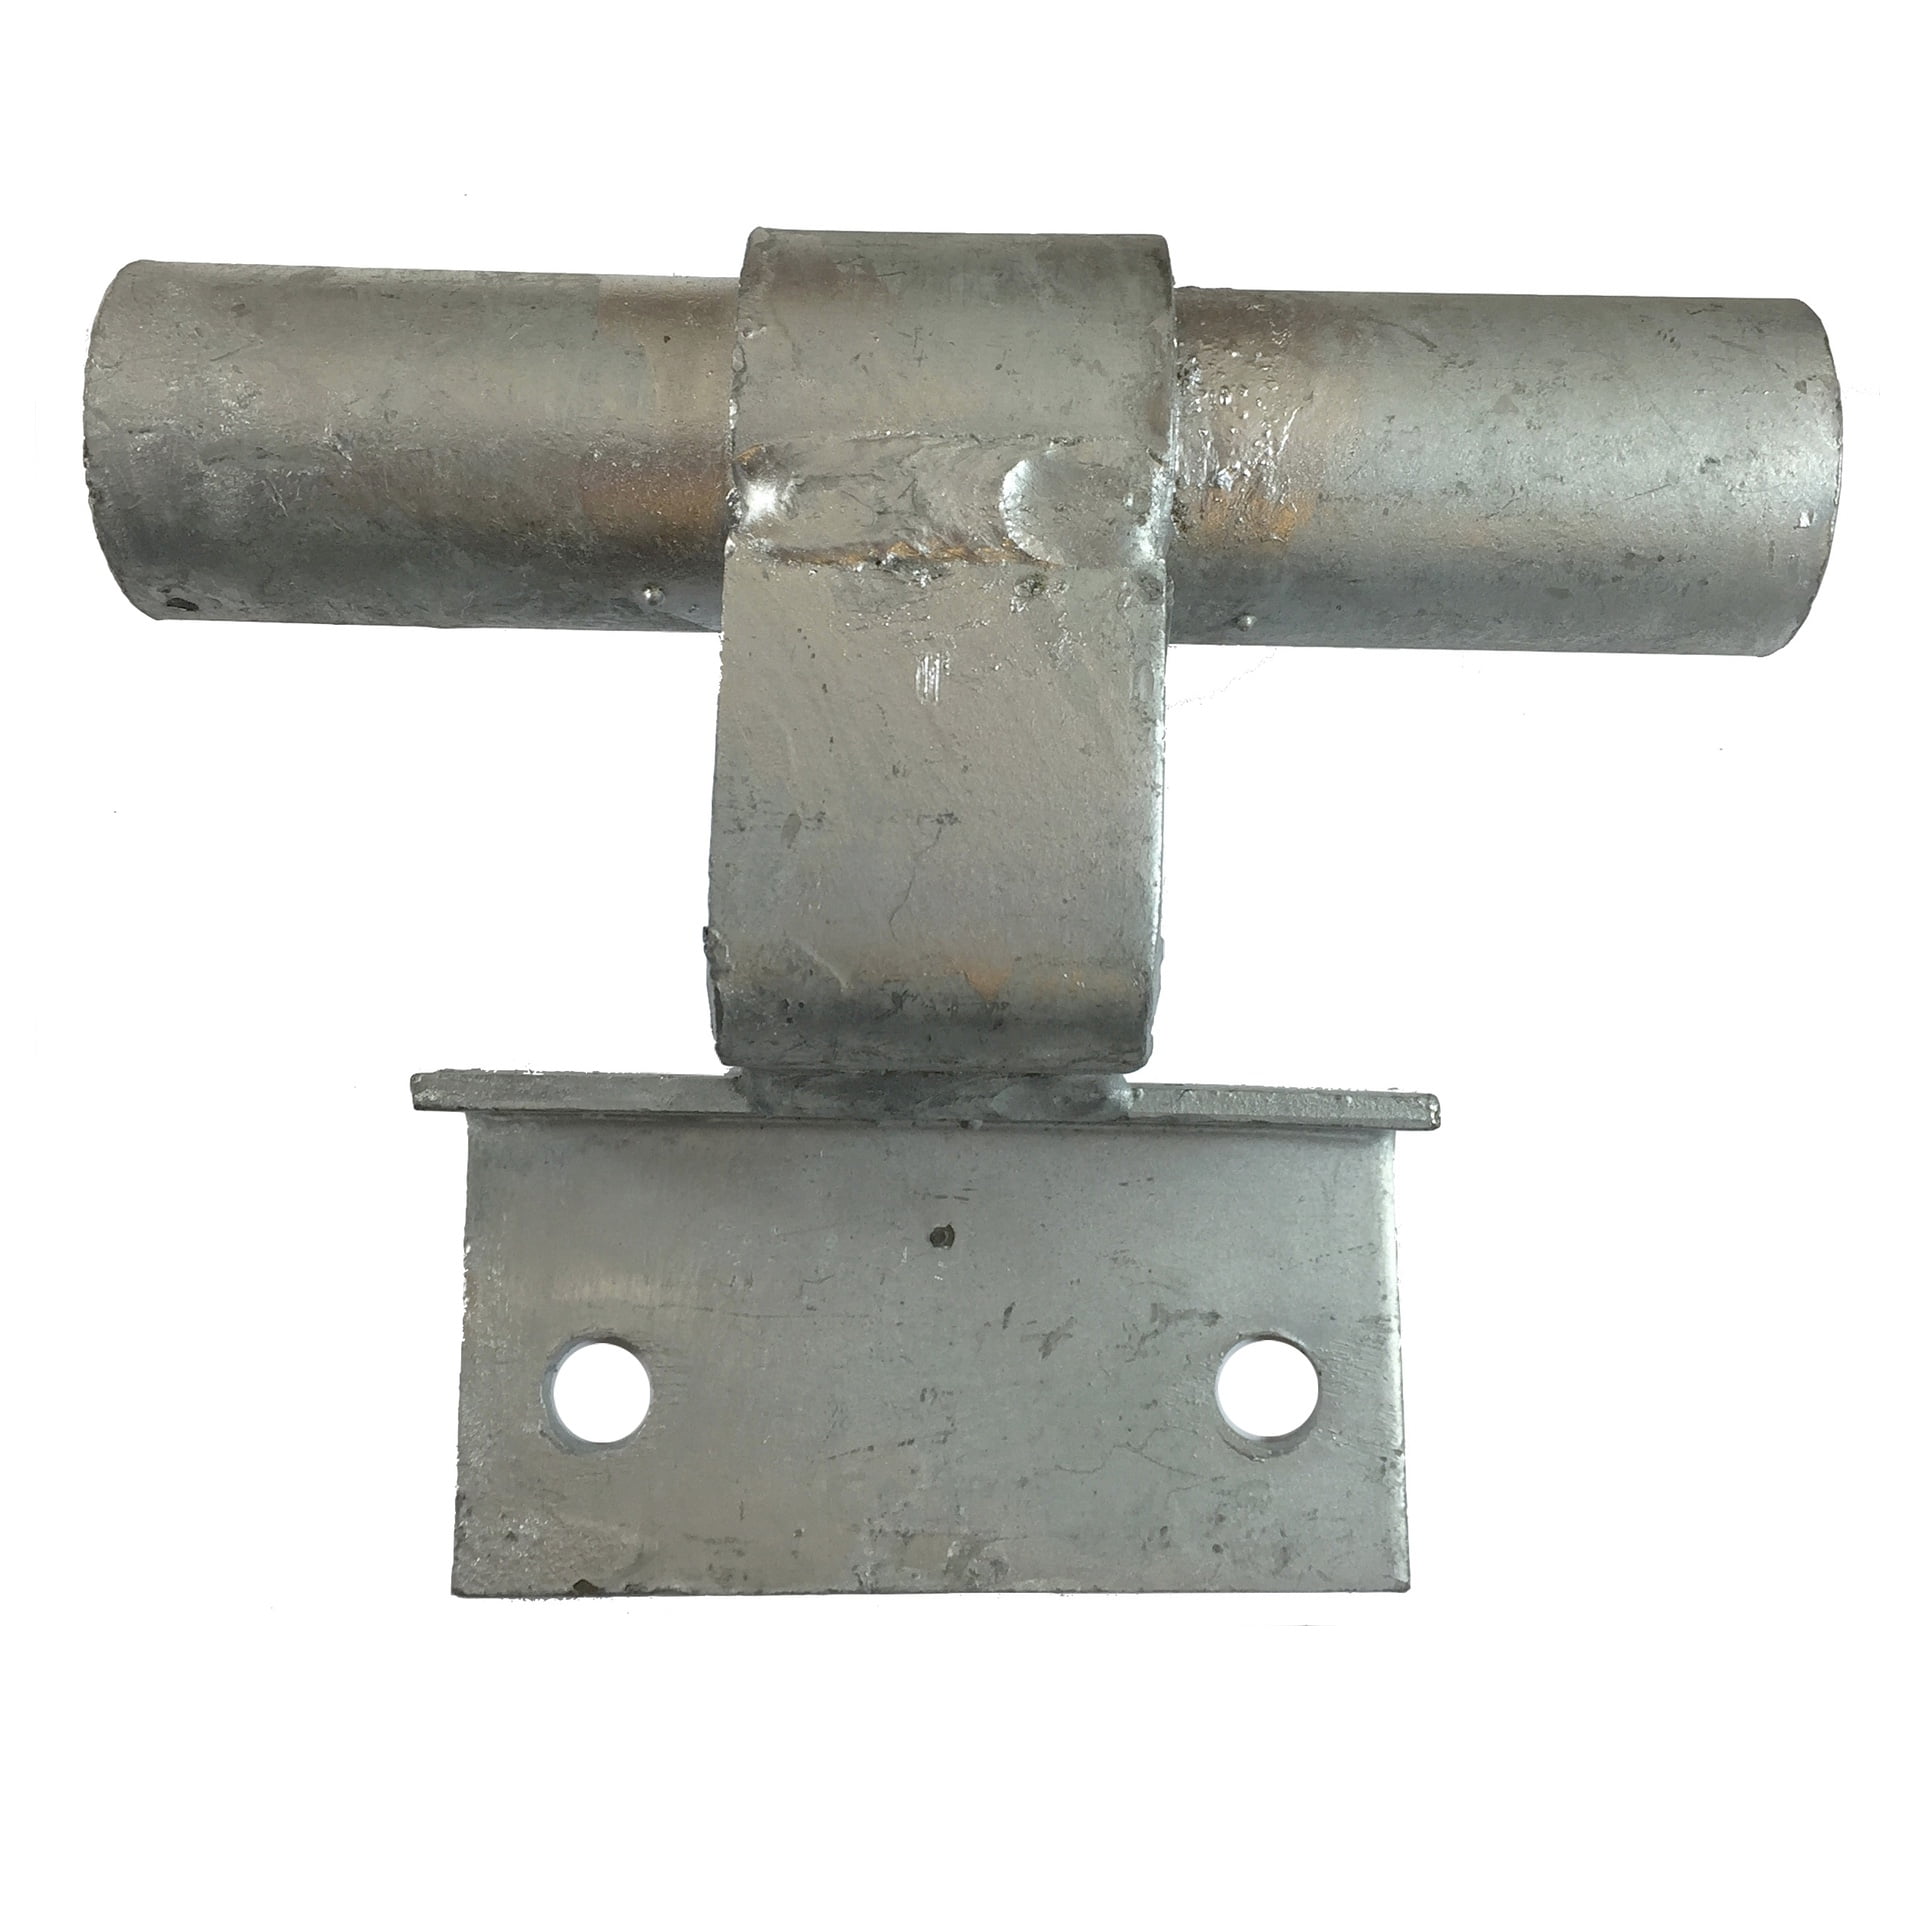 2-3/8 or 2 7/8 x 1 5/8 Track Brackets for Roll Gate Slide Chain Link Fence SHD 